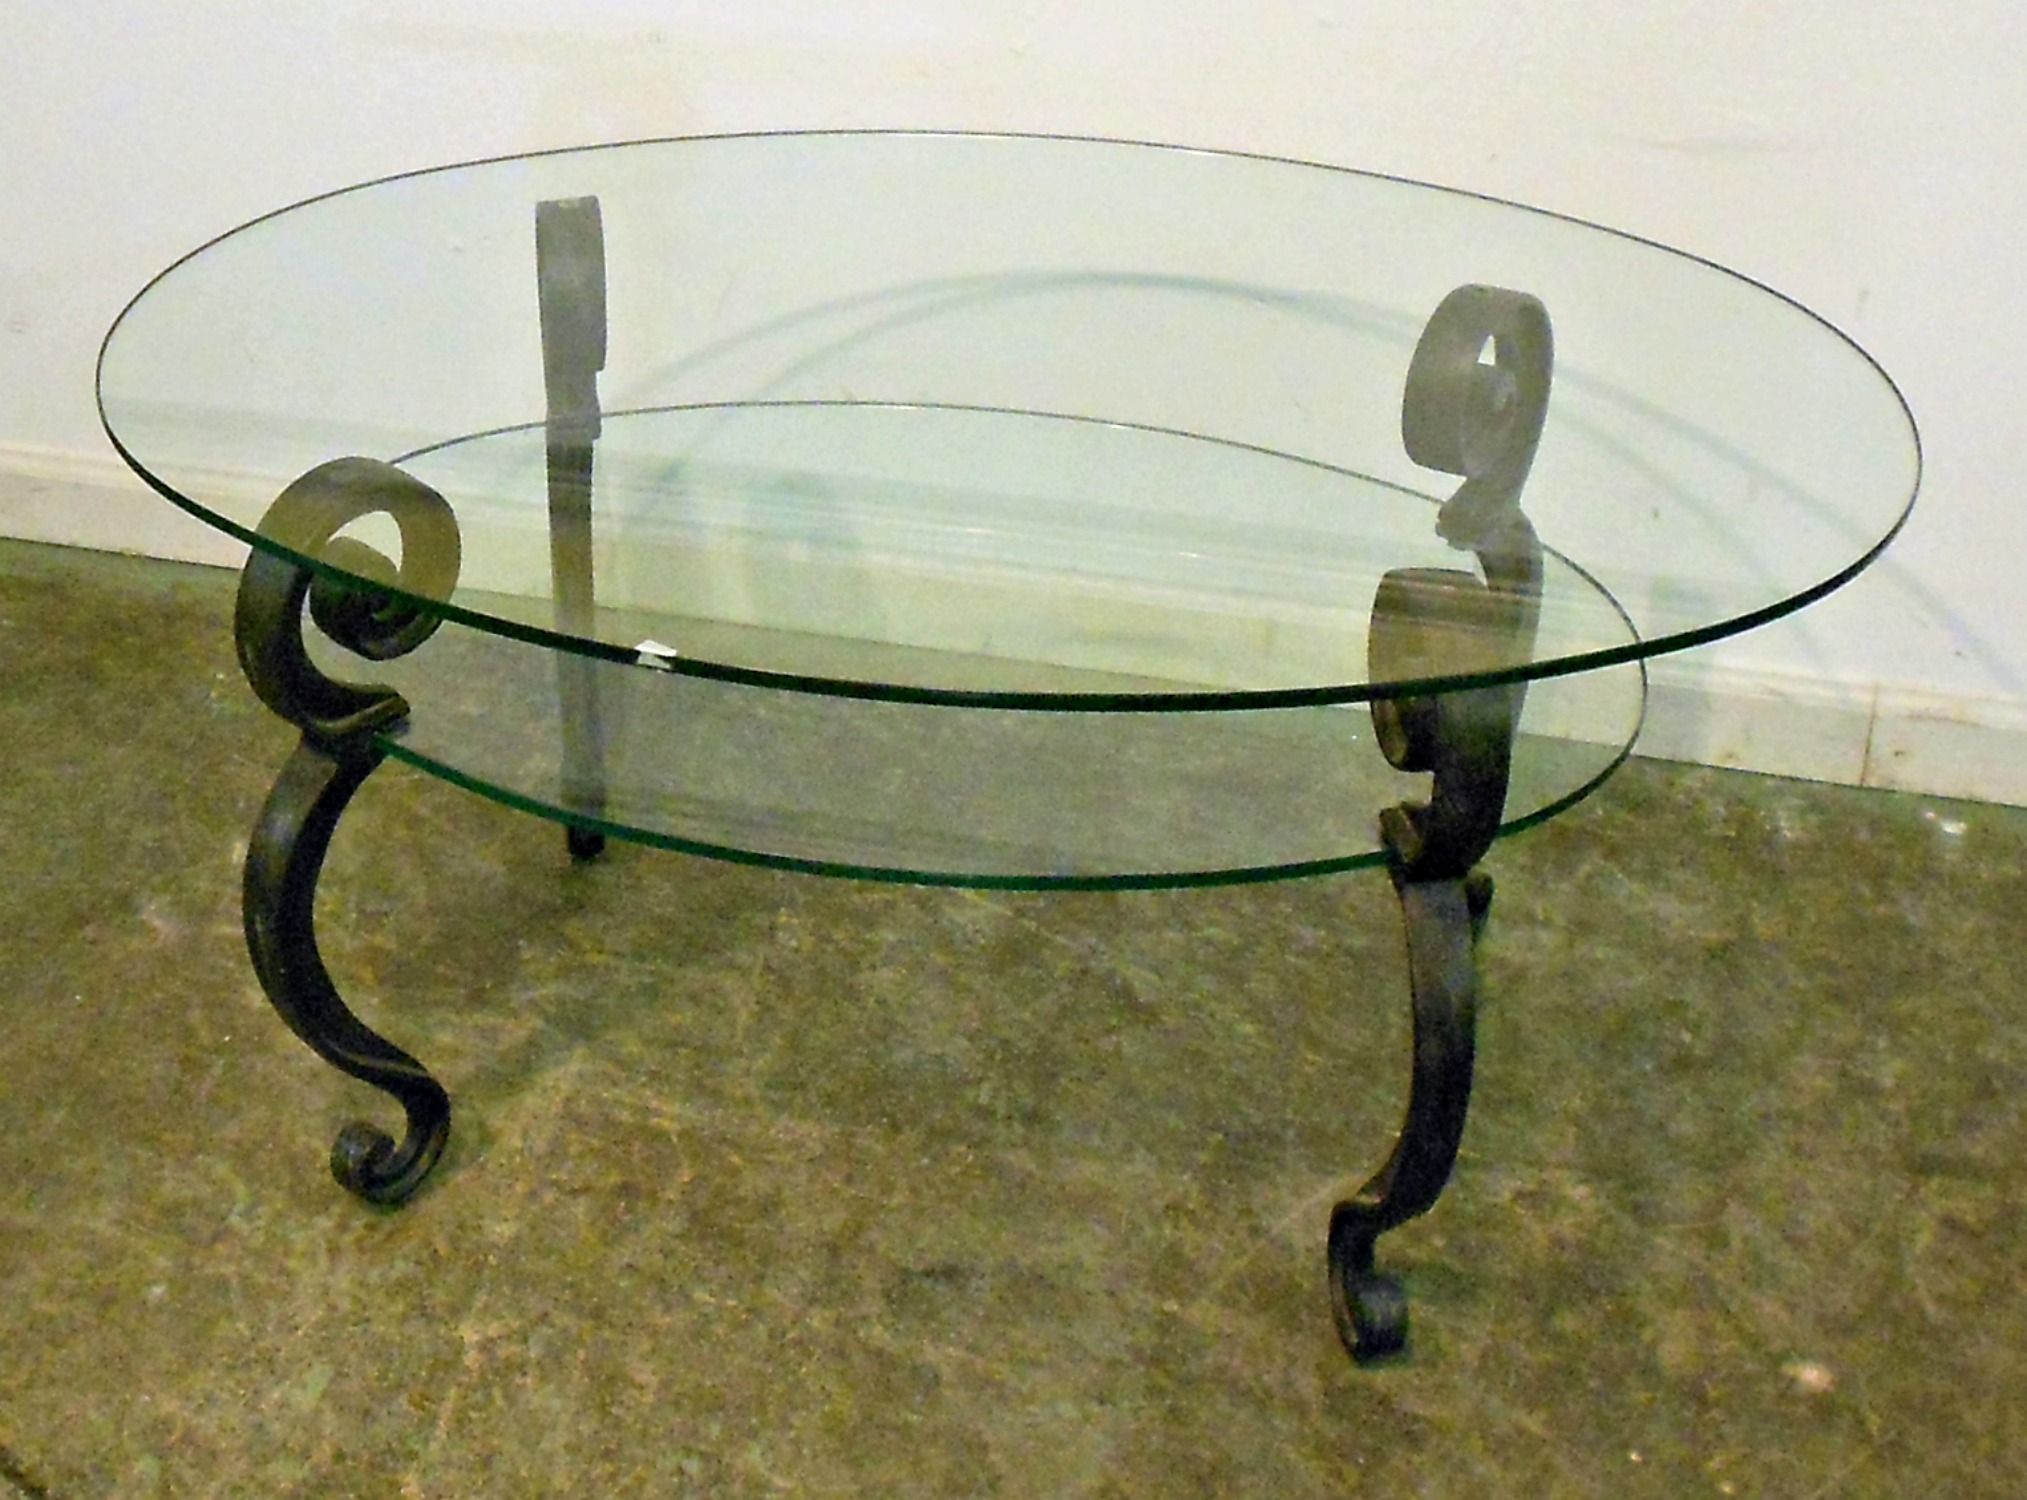 Glass Coffee Tables For Small Spaces One Trick You Can Use Is A Small Tables Mode The Round Table Would That Is Inherent Take Up Less Space From The Square (Photo 7 of 10)